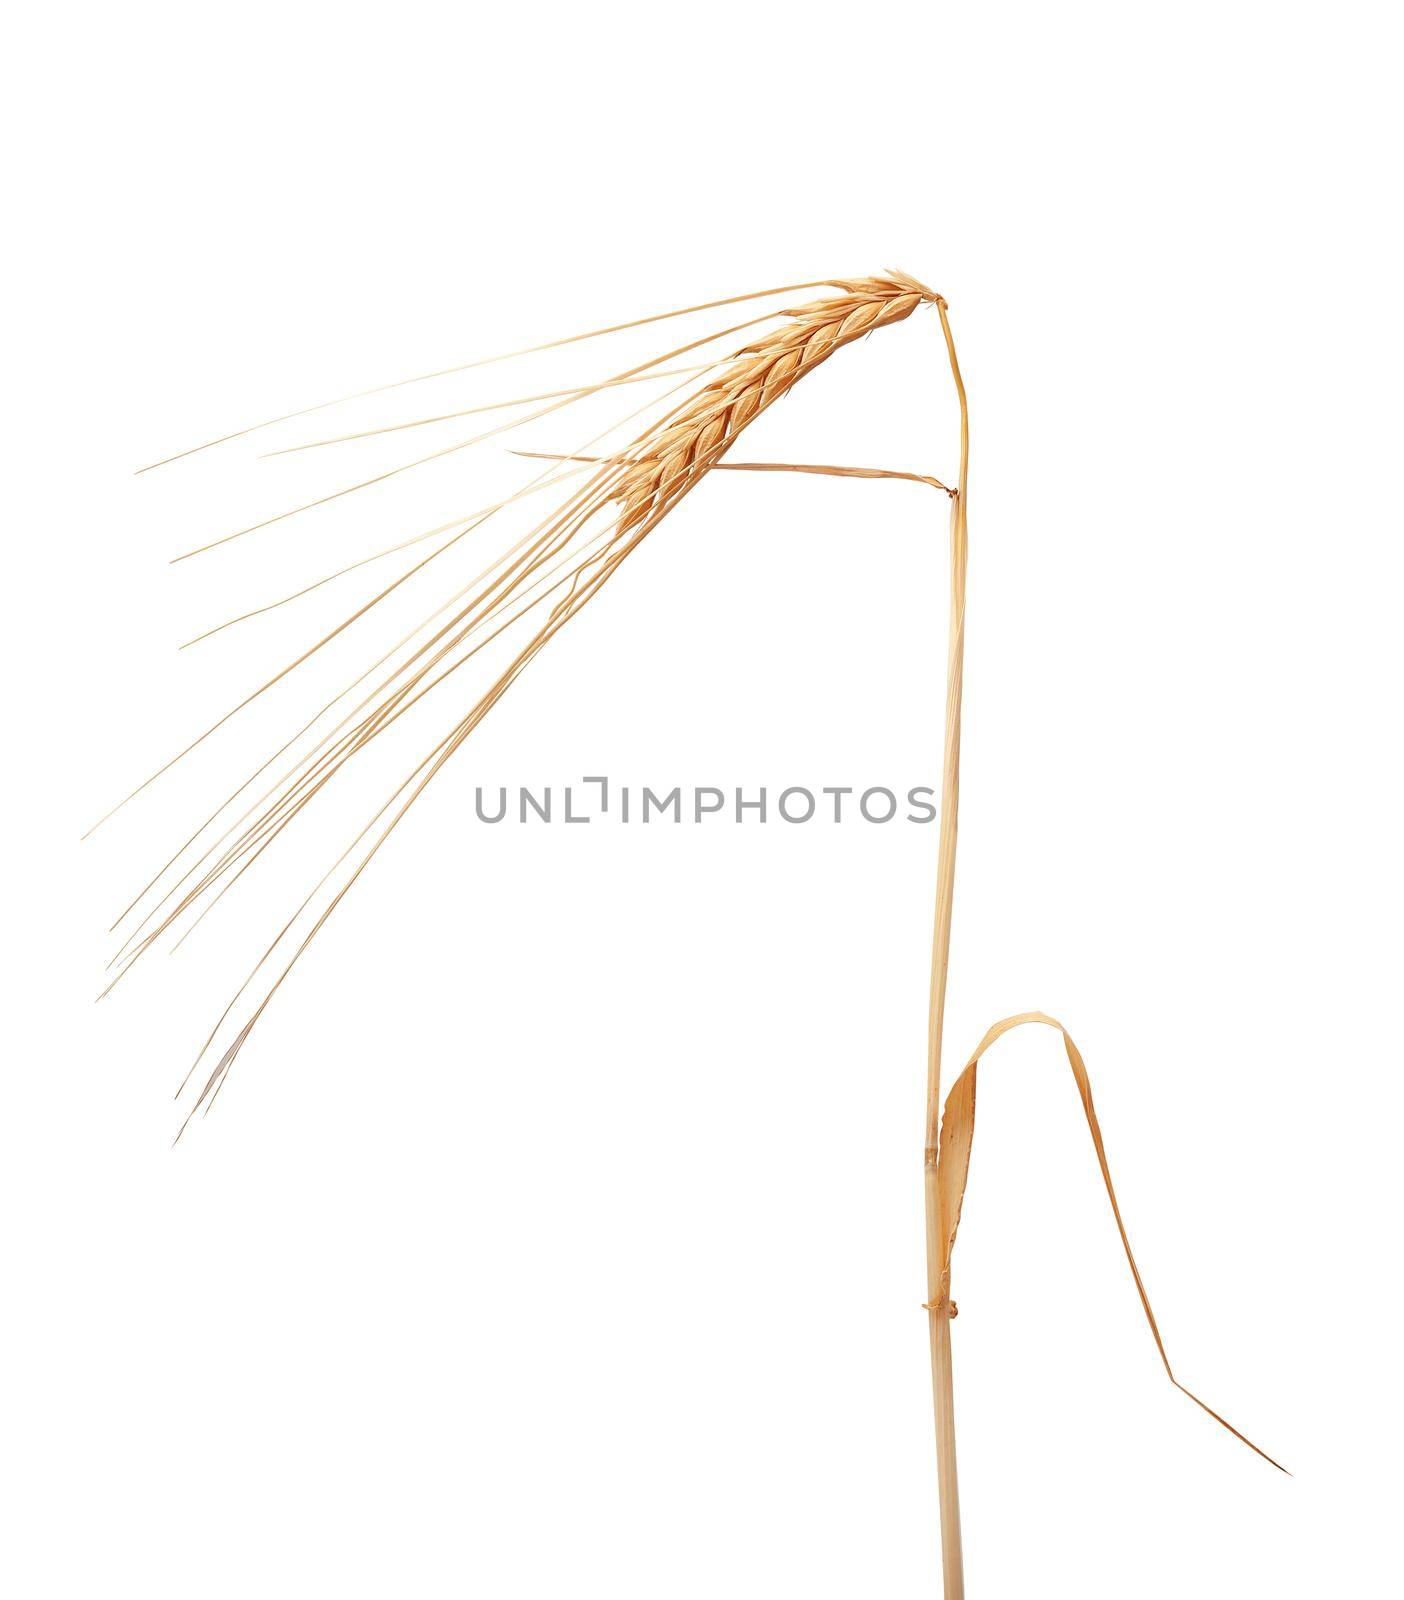 Isolated one spikelet of barley on the white background